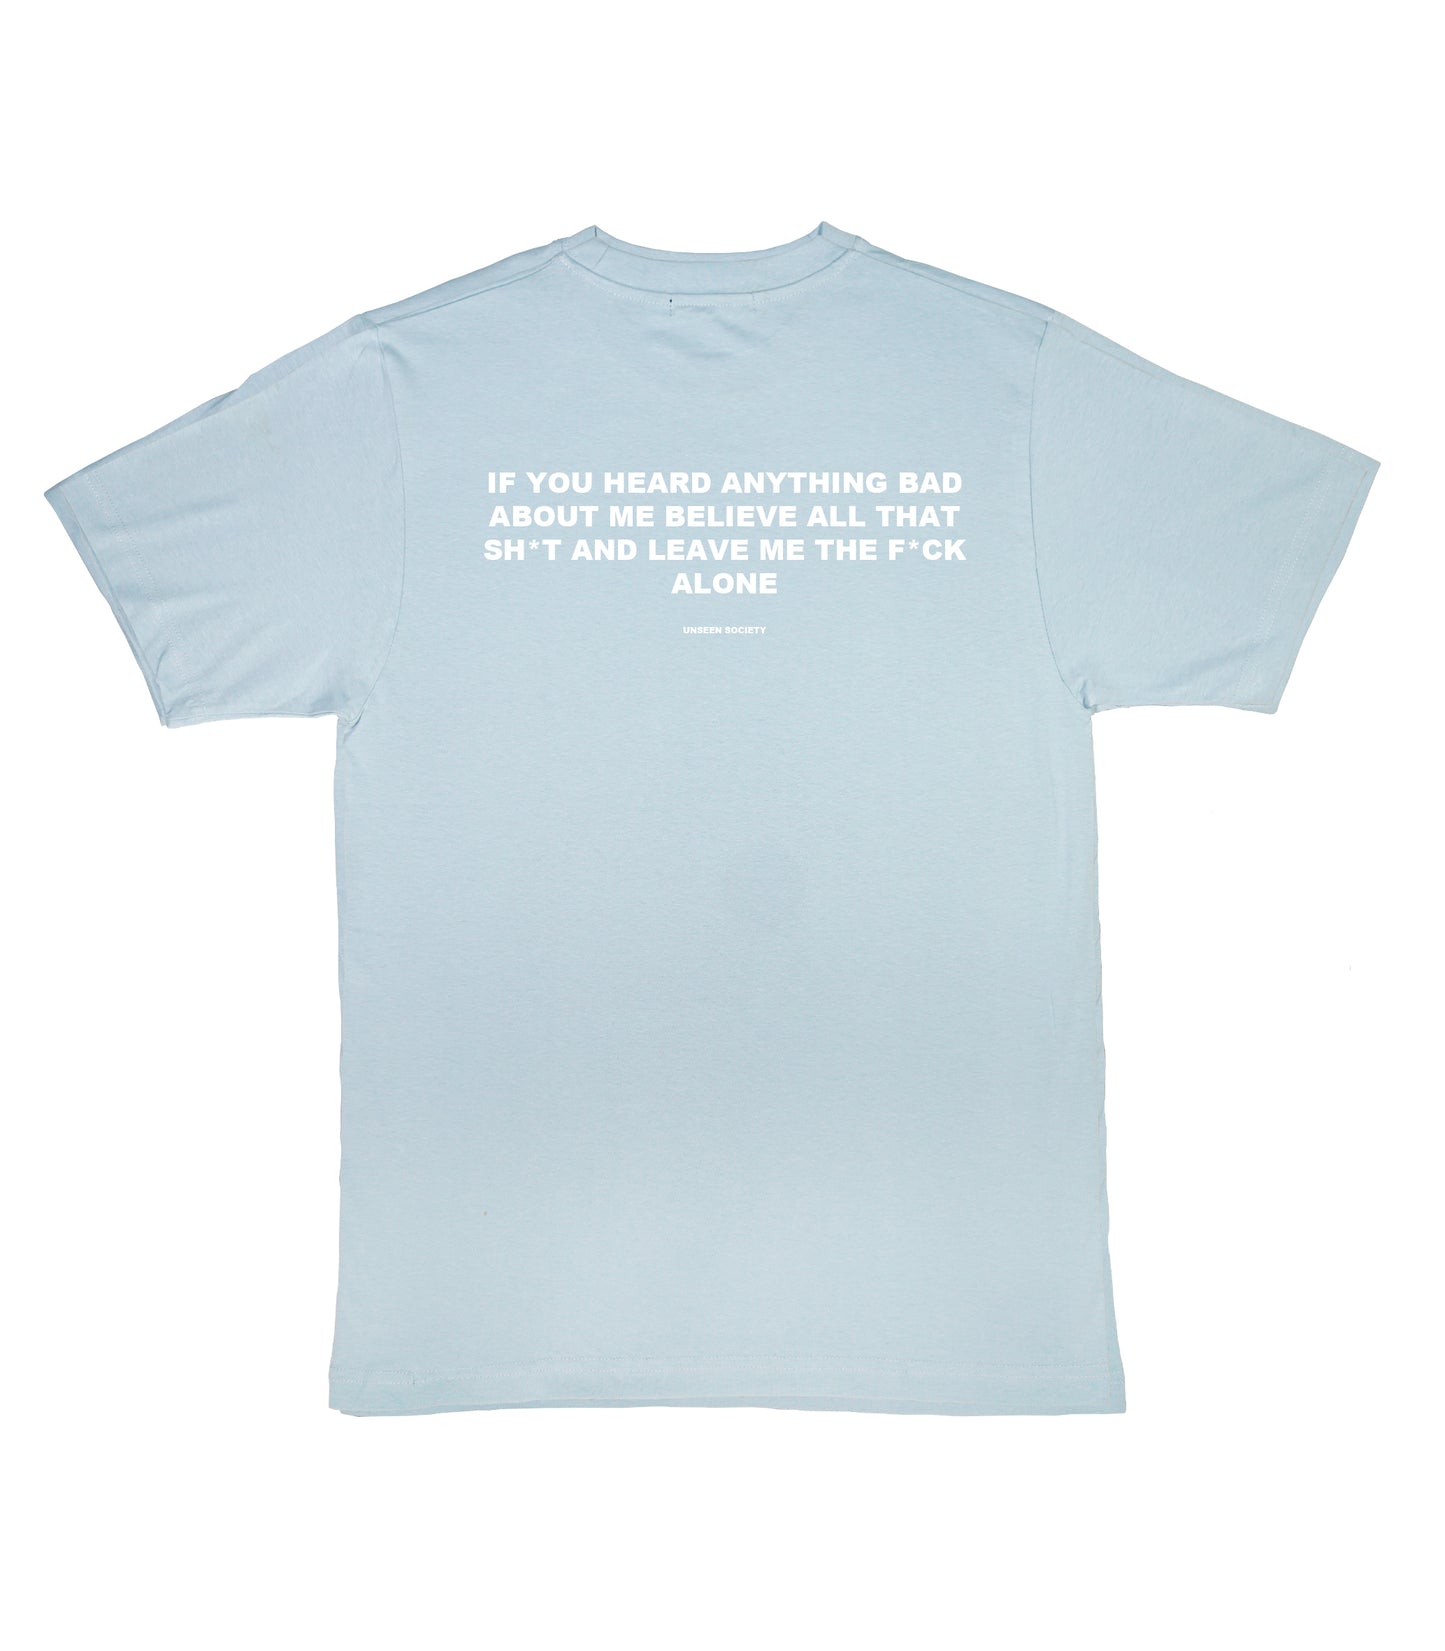 Leave me alone quote tee